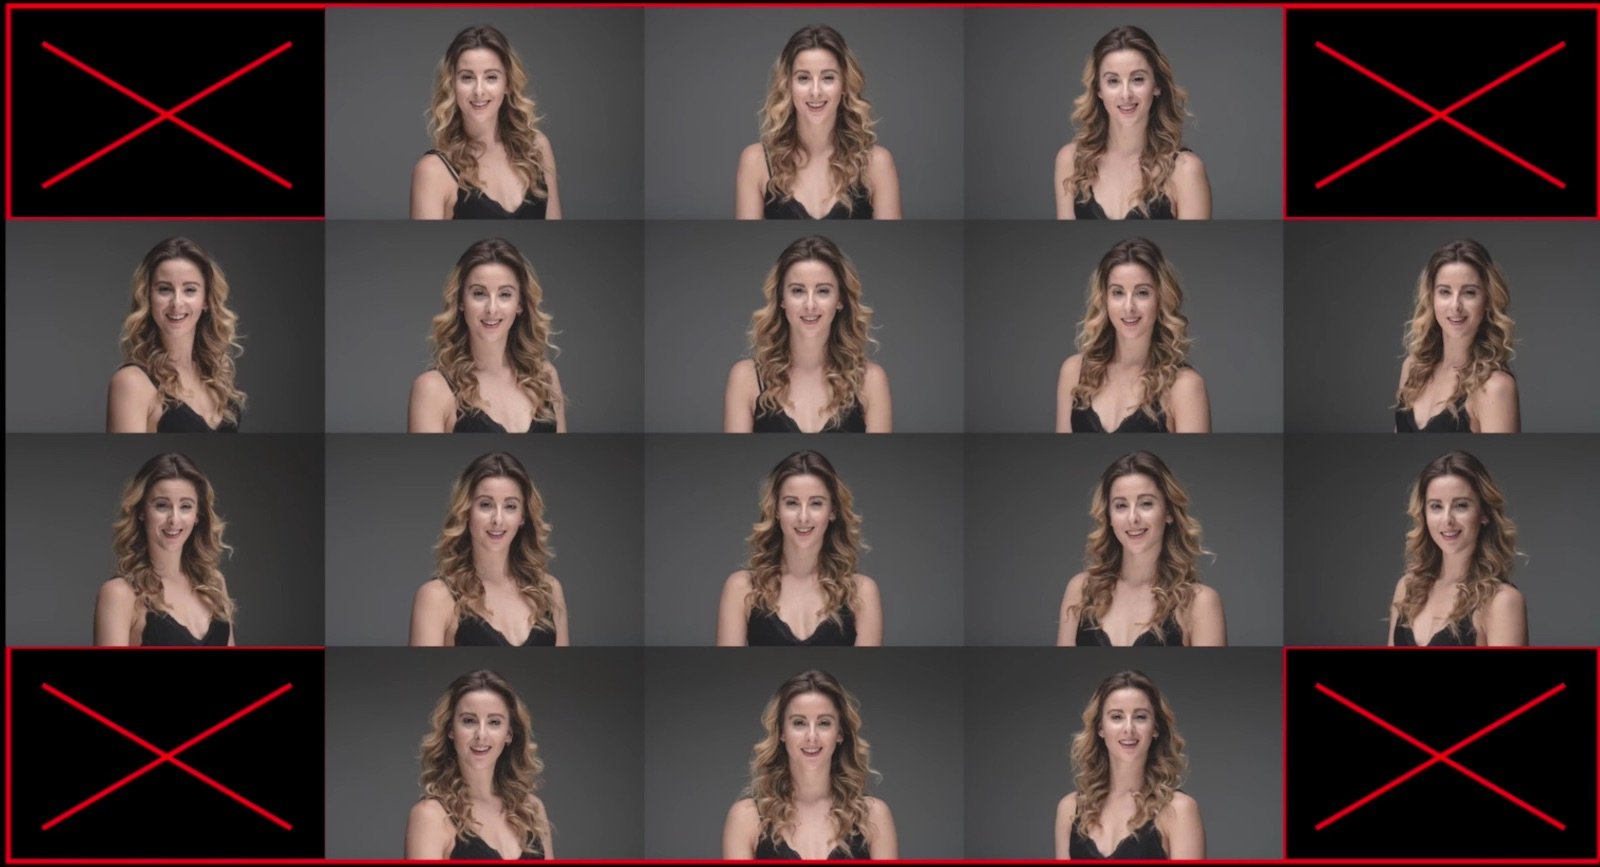 Photographer Uses Science to Find the Perfect Portrait Angle